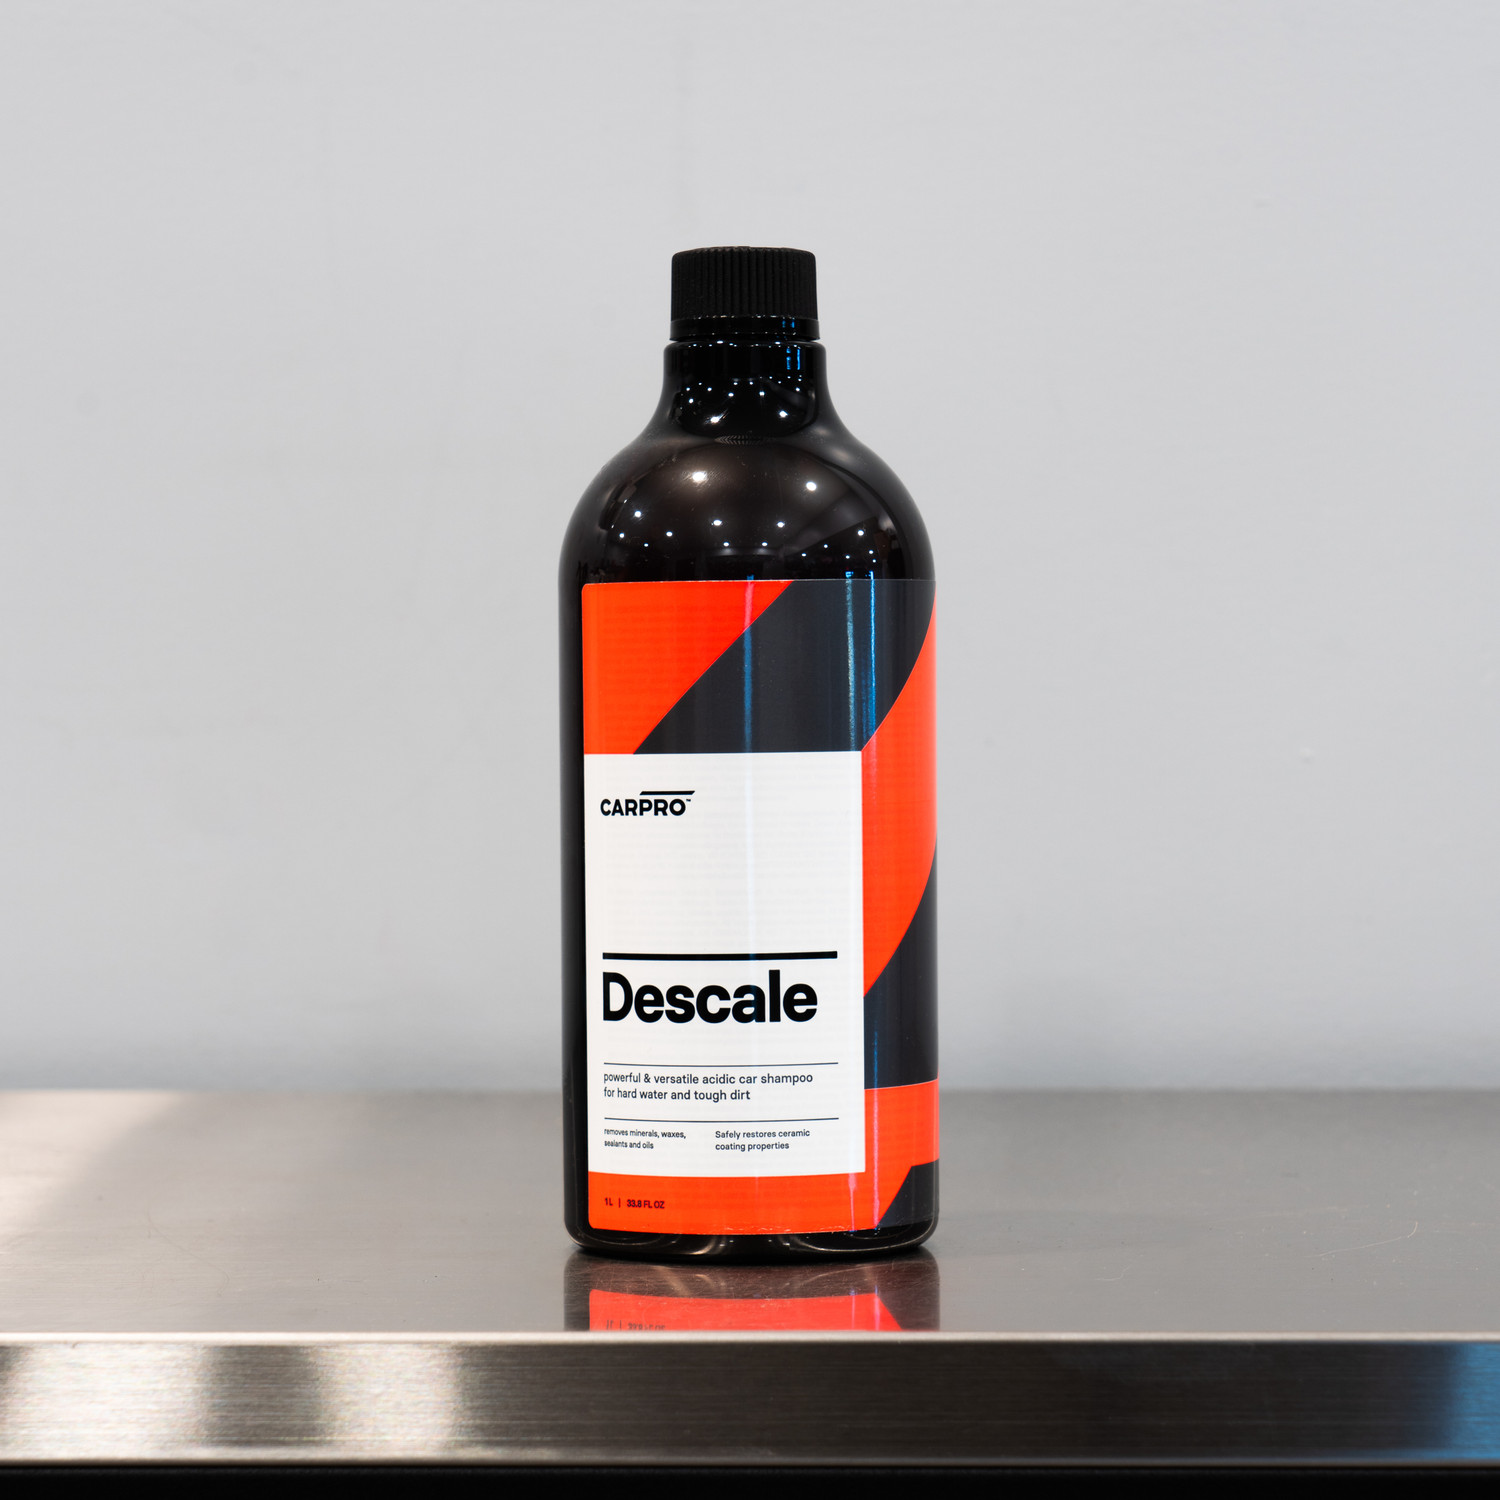 🌟CARPRO Descale, our strongest car shampoo! 💪Designed for maximum  efficiency against tough dirt, hard water and all manner of nastiness.  🛡Easily breaks down the built-up contamination that reduces gloss and  restores the